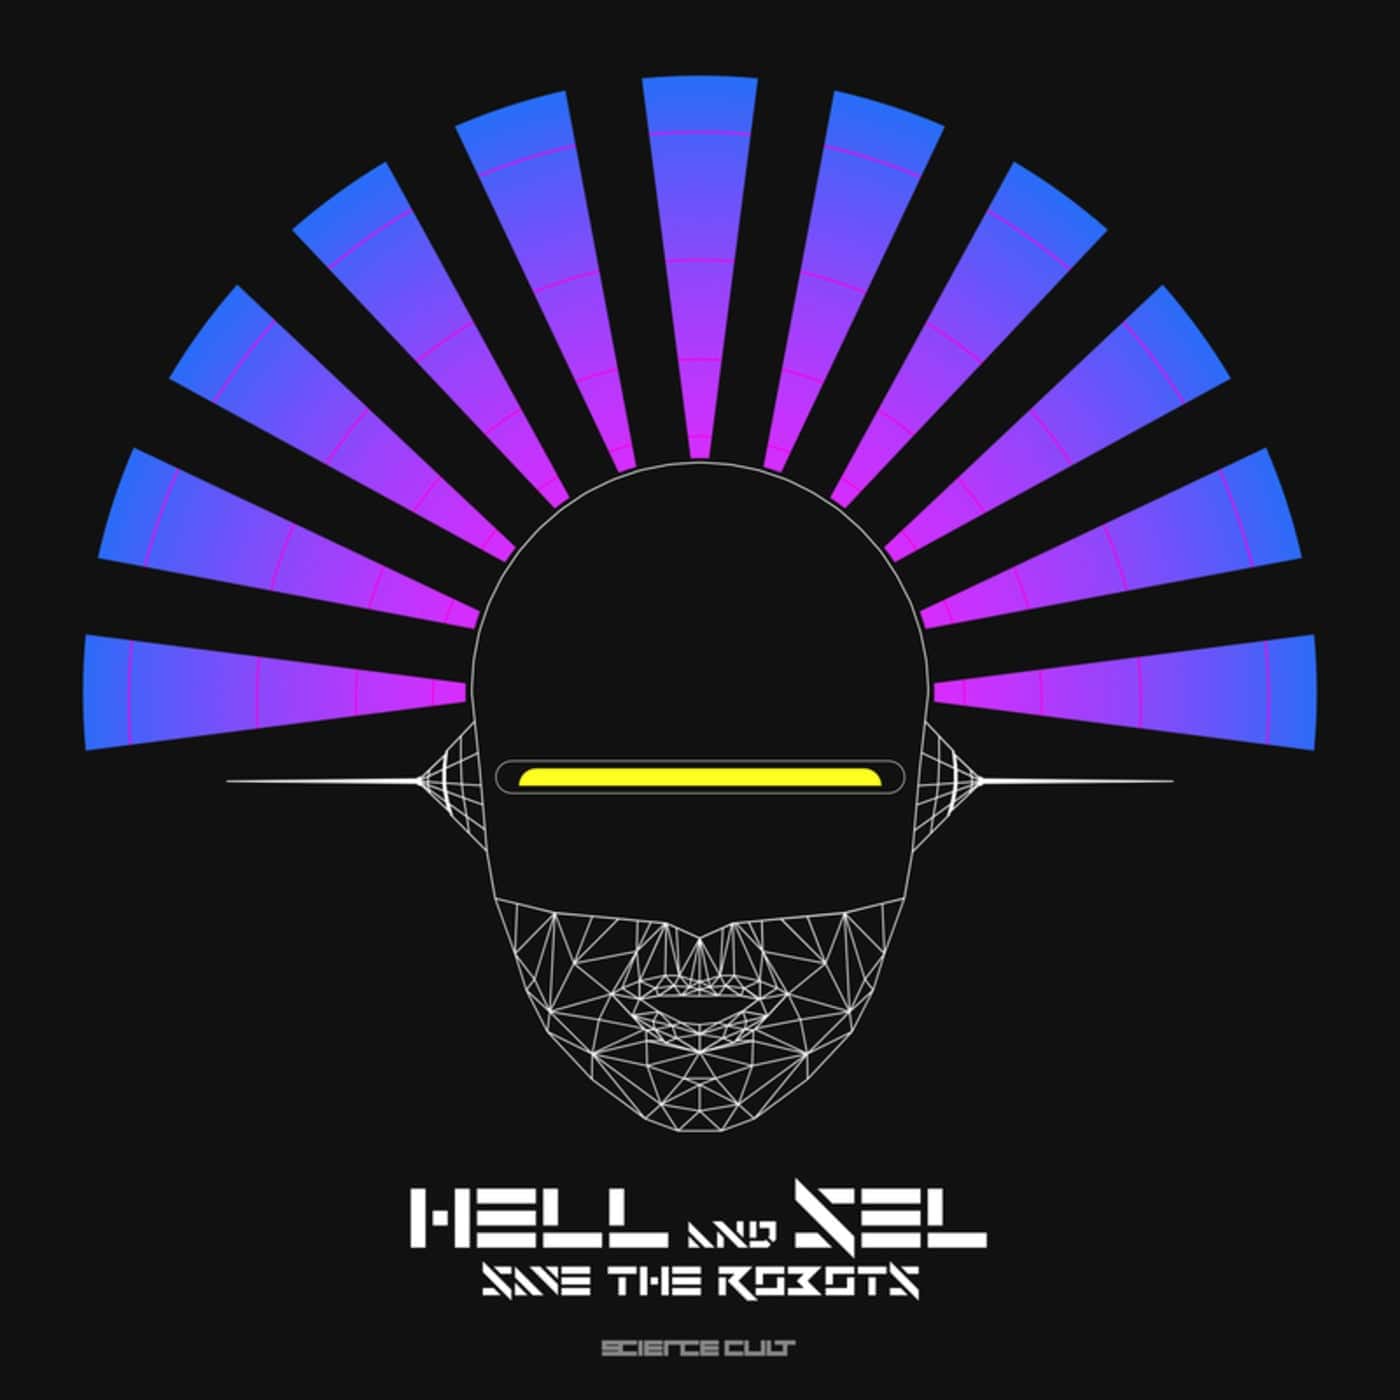 Download DJ Hell, John Selway - Save the Robots on Electrobuzz